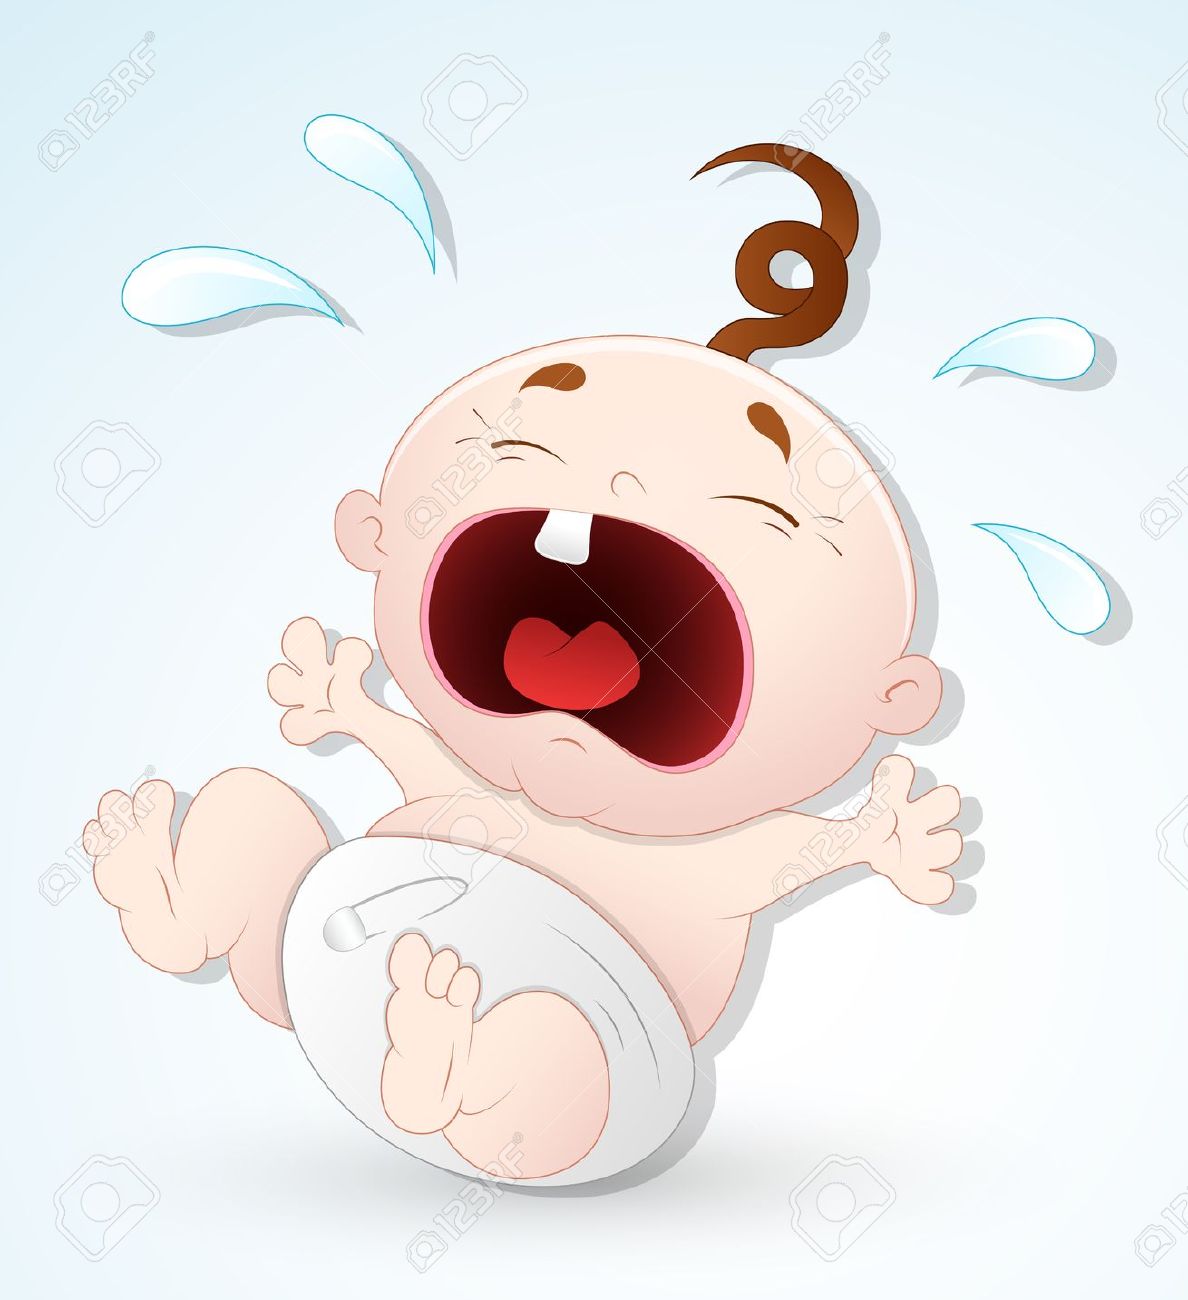 Clipart Crying Babies Royalty